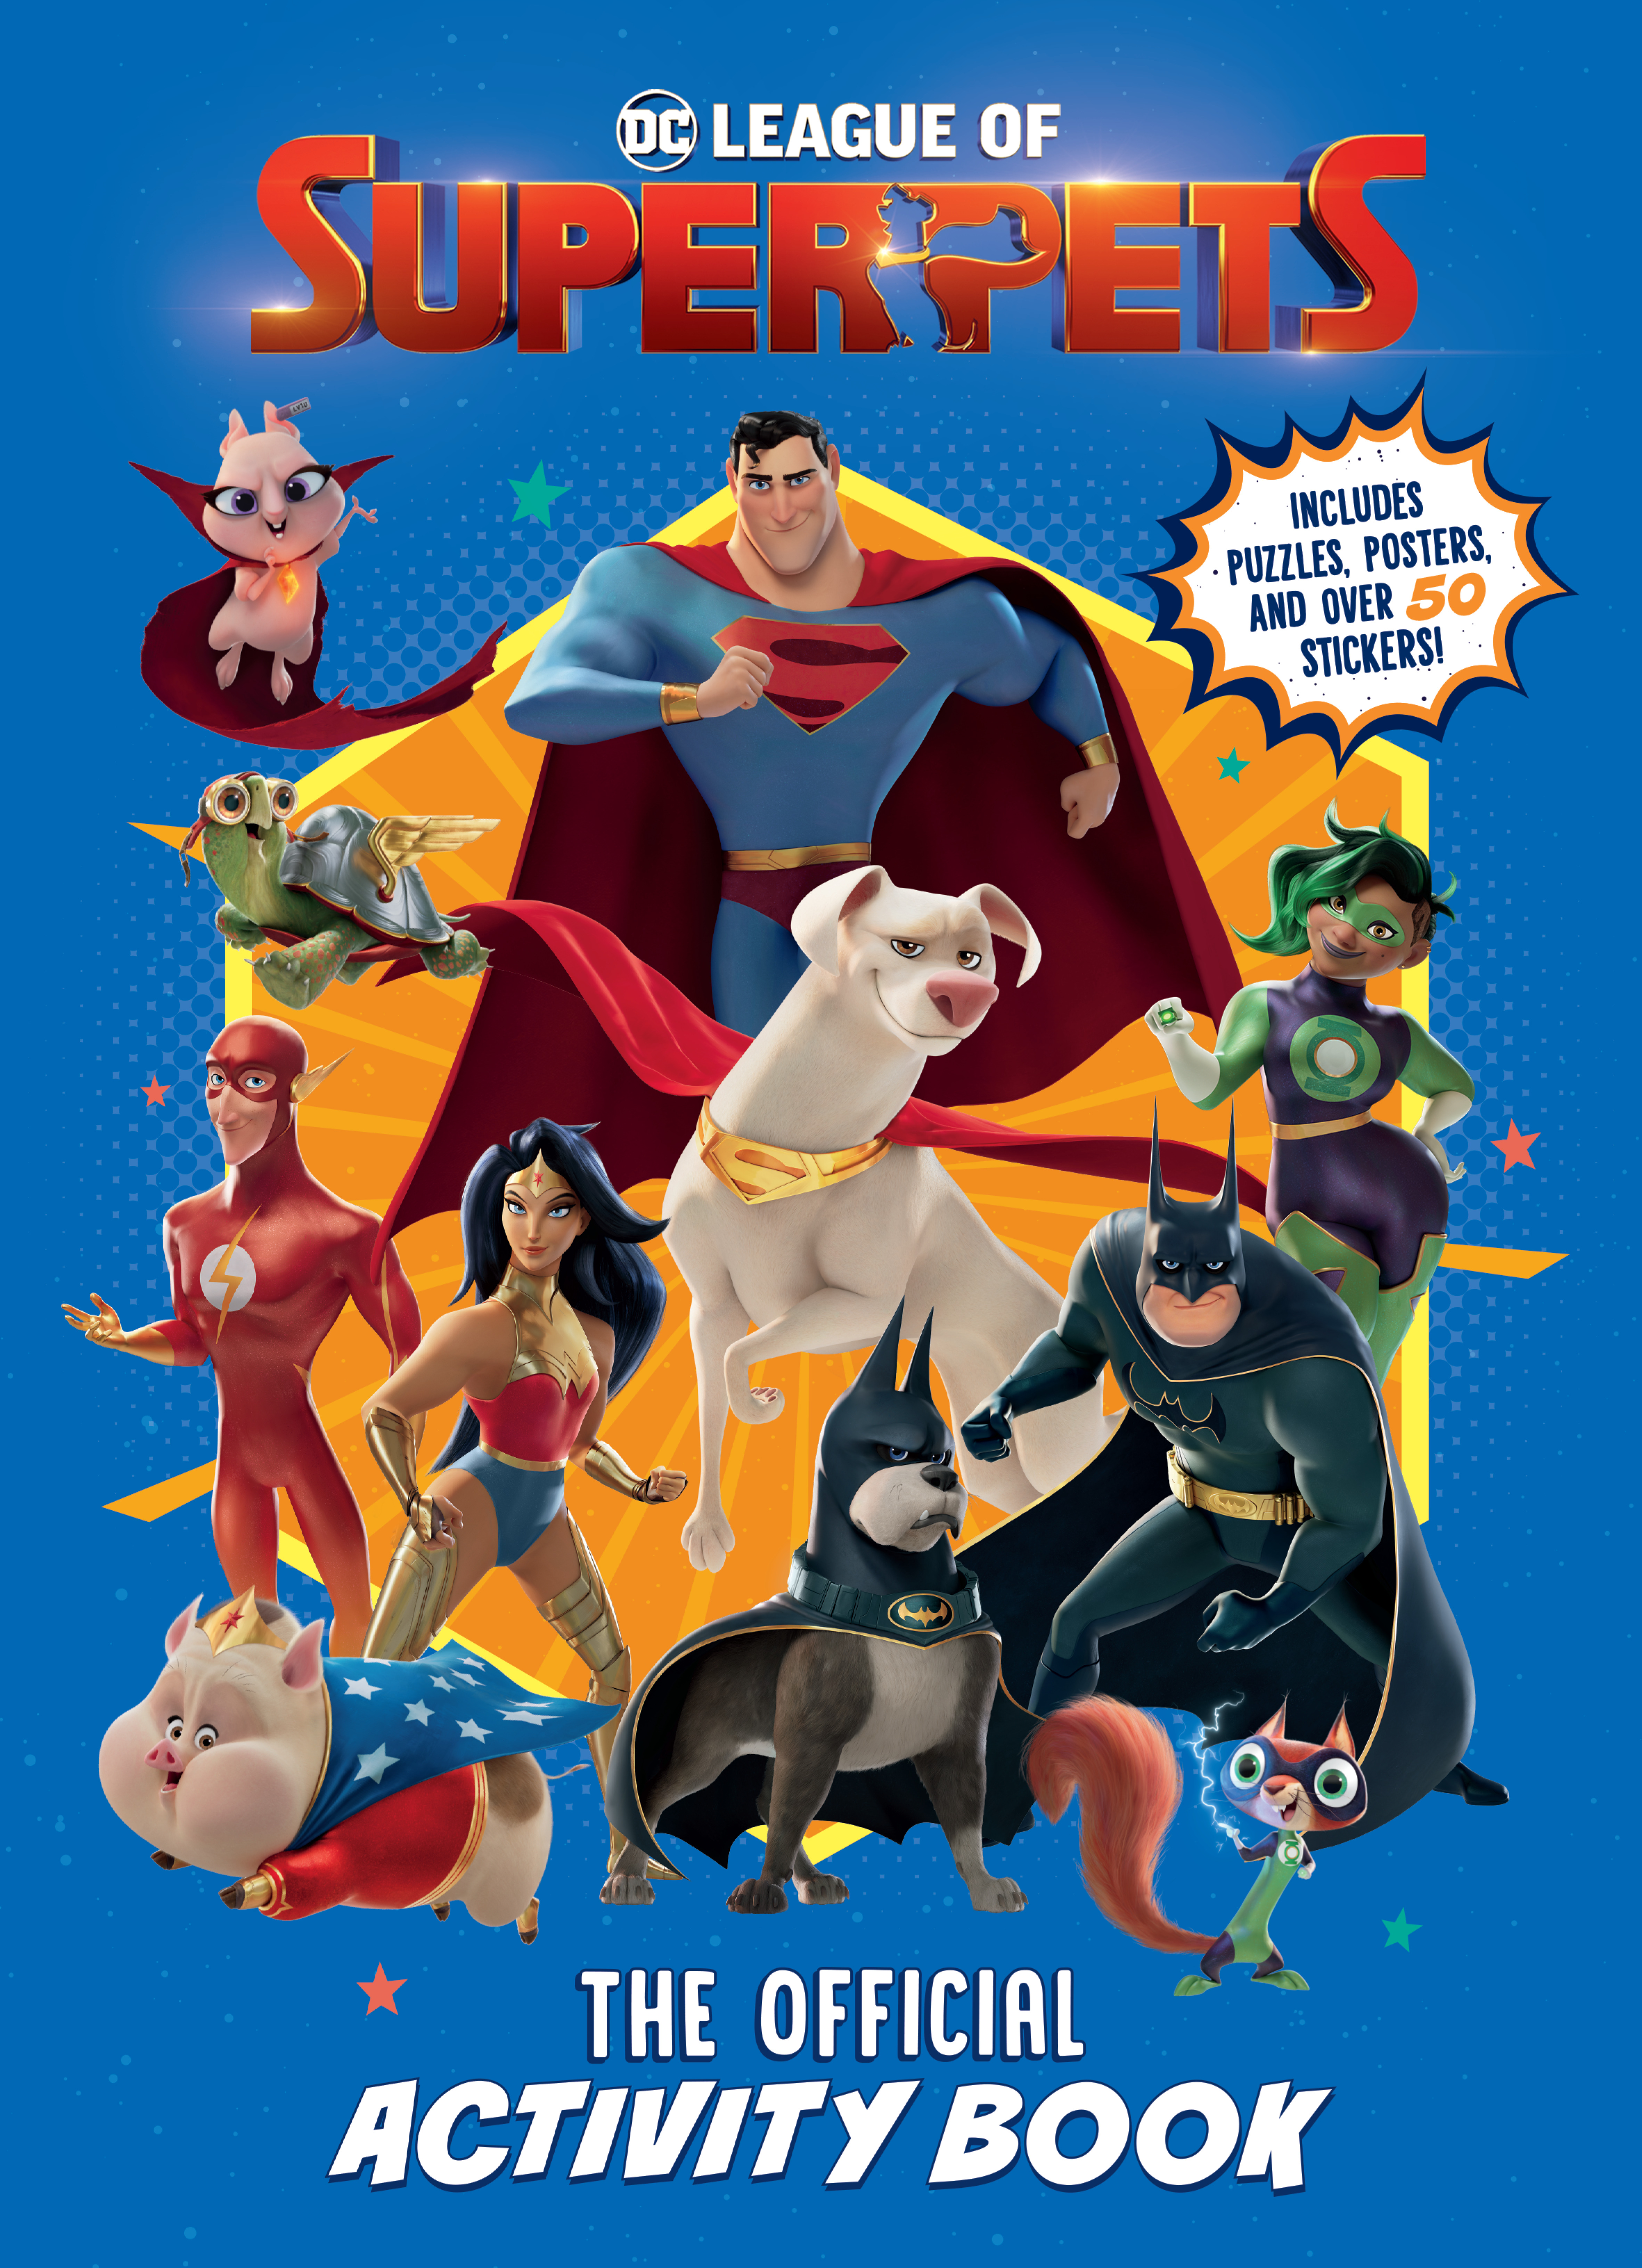 DC League of Super-Pets - The Official Activity Book : Includes puzzles, posters, and over 30 stickers! | Chlebowski, Rachel